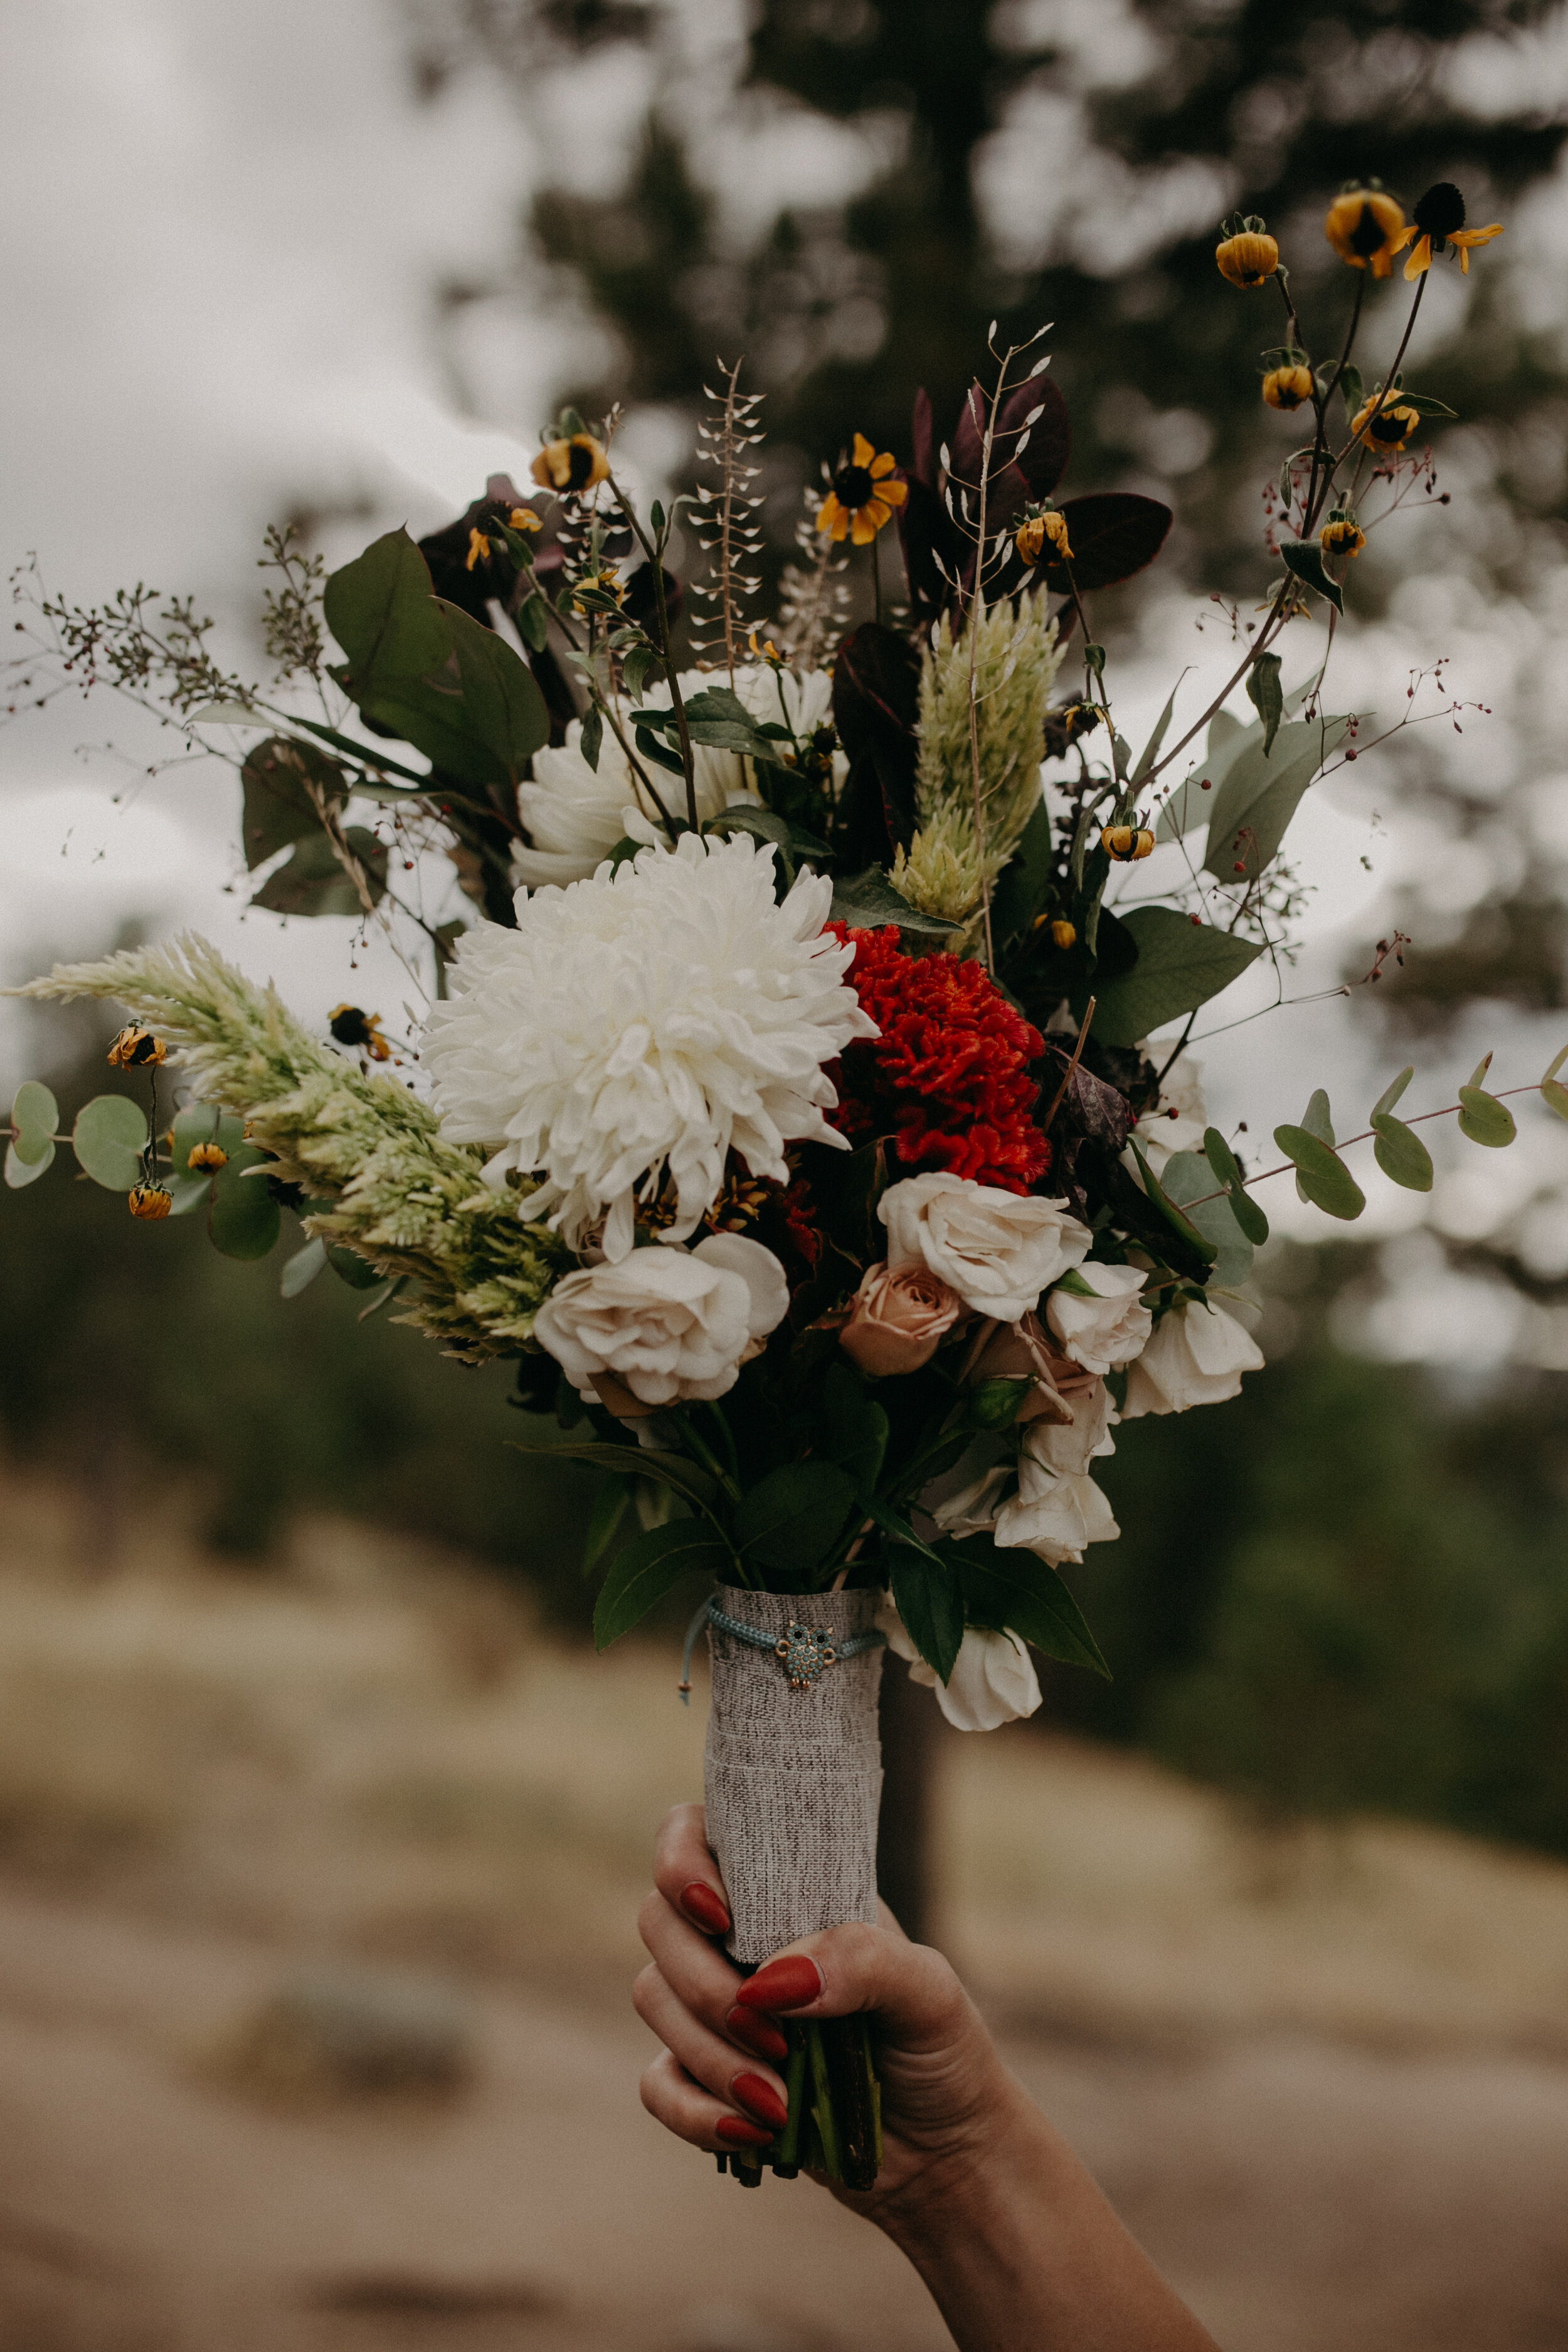  Boulder Colorado bridal bouquet made from farmers market flowers 